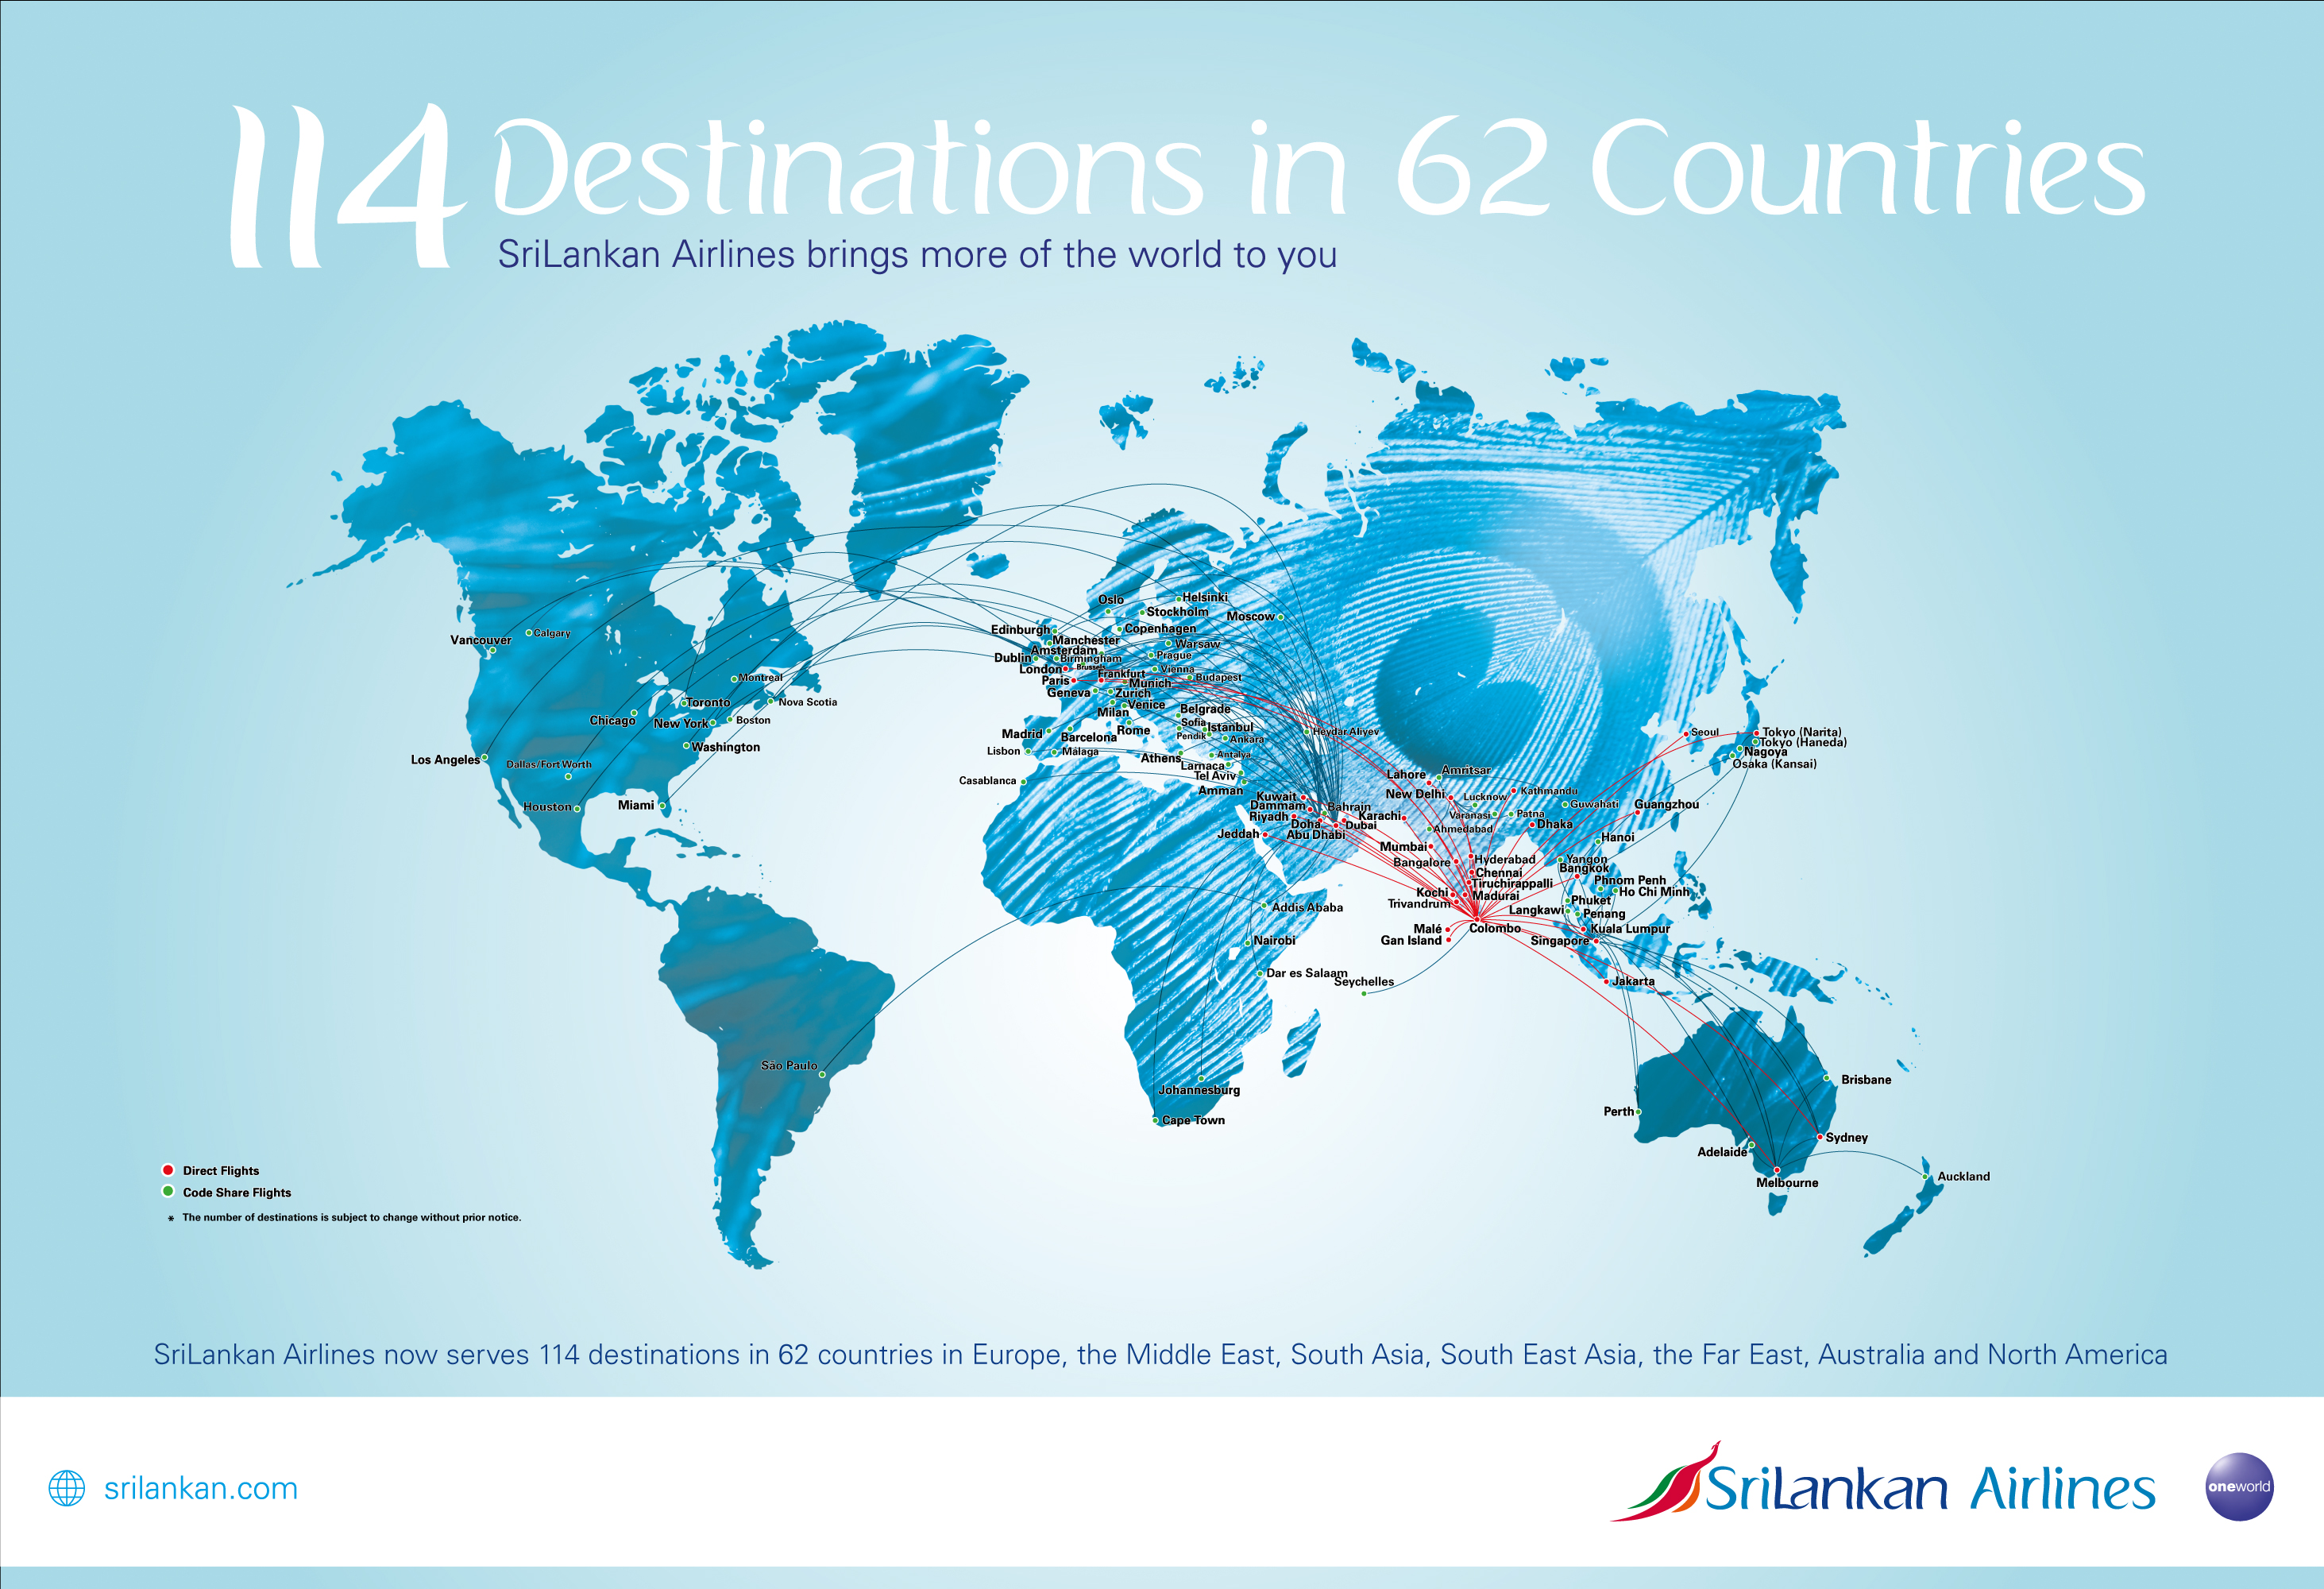 The flight route map of SriLankan Airlines